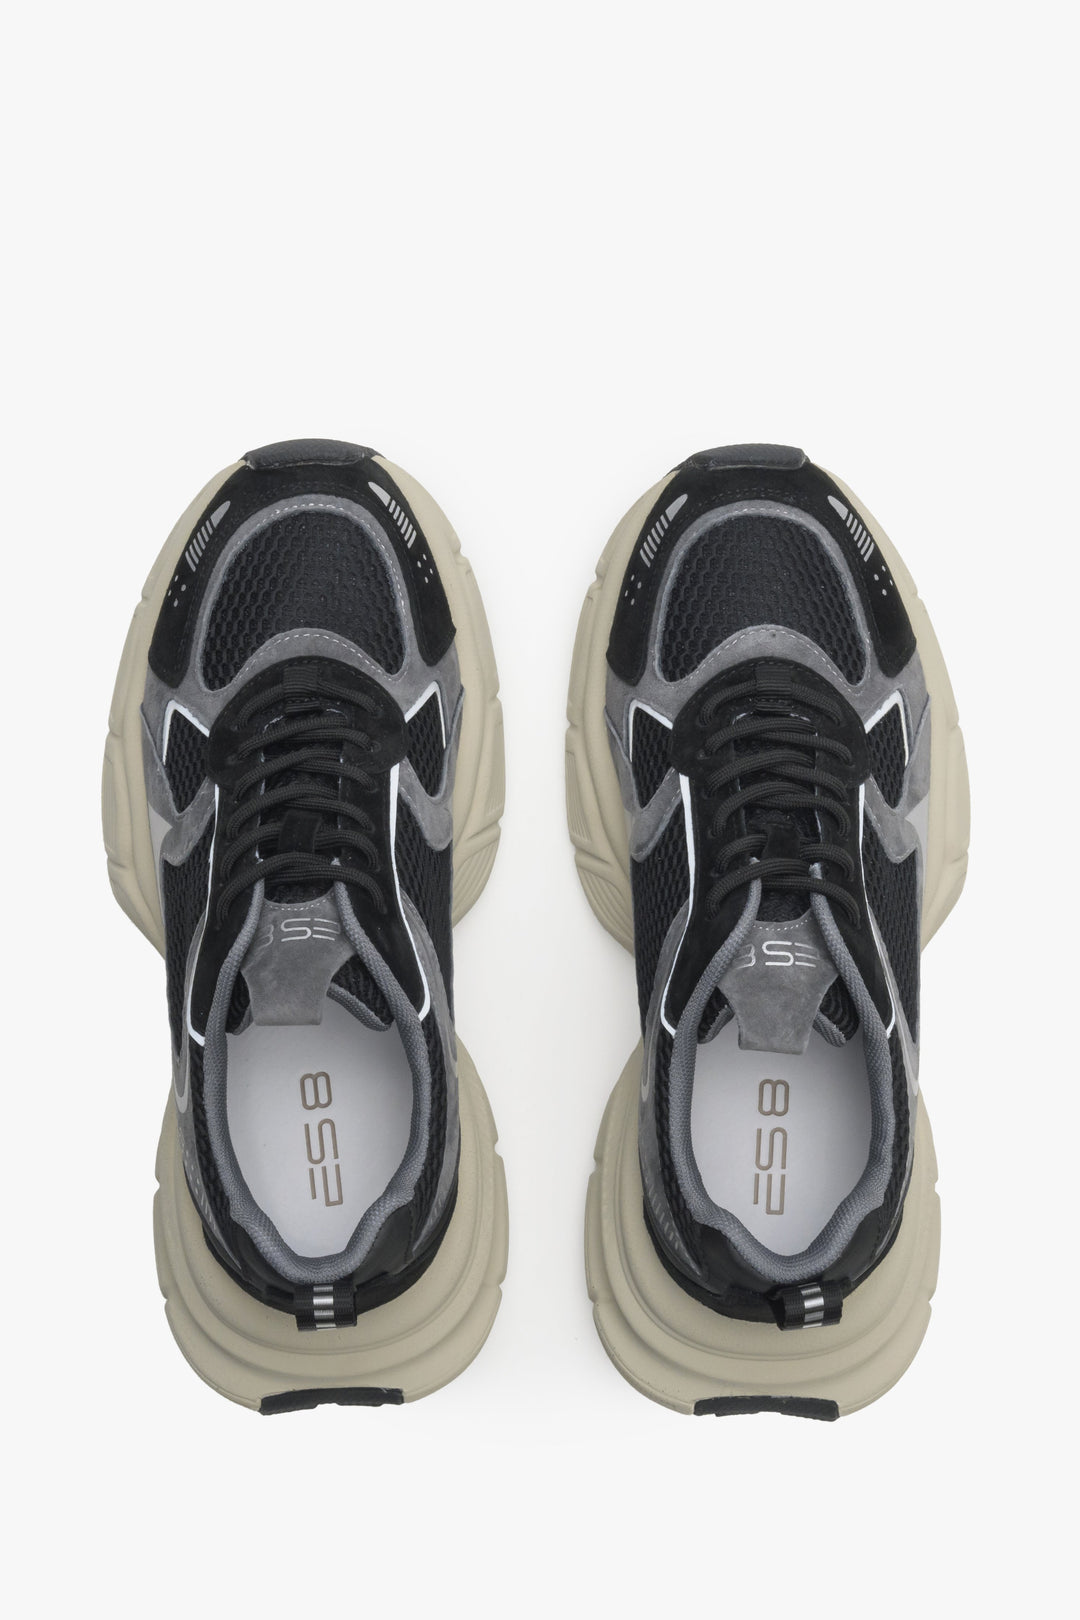 Women's black and grey ES8 sneakers - top view presentation of the model.